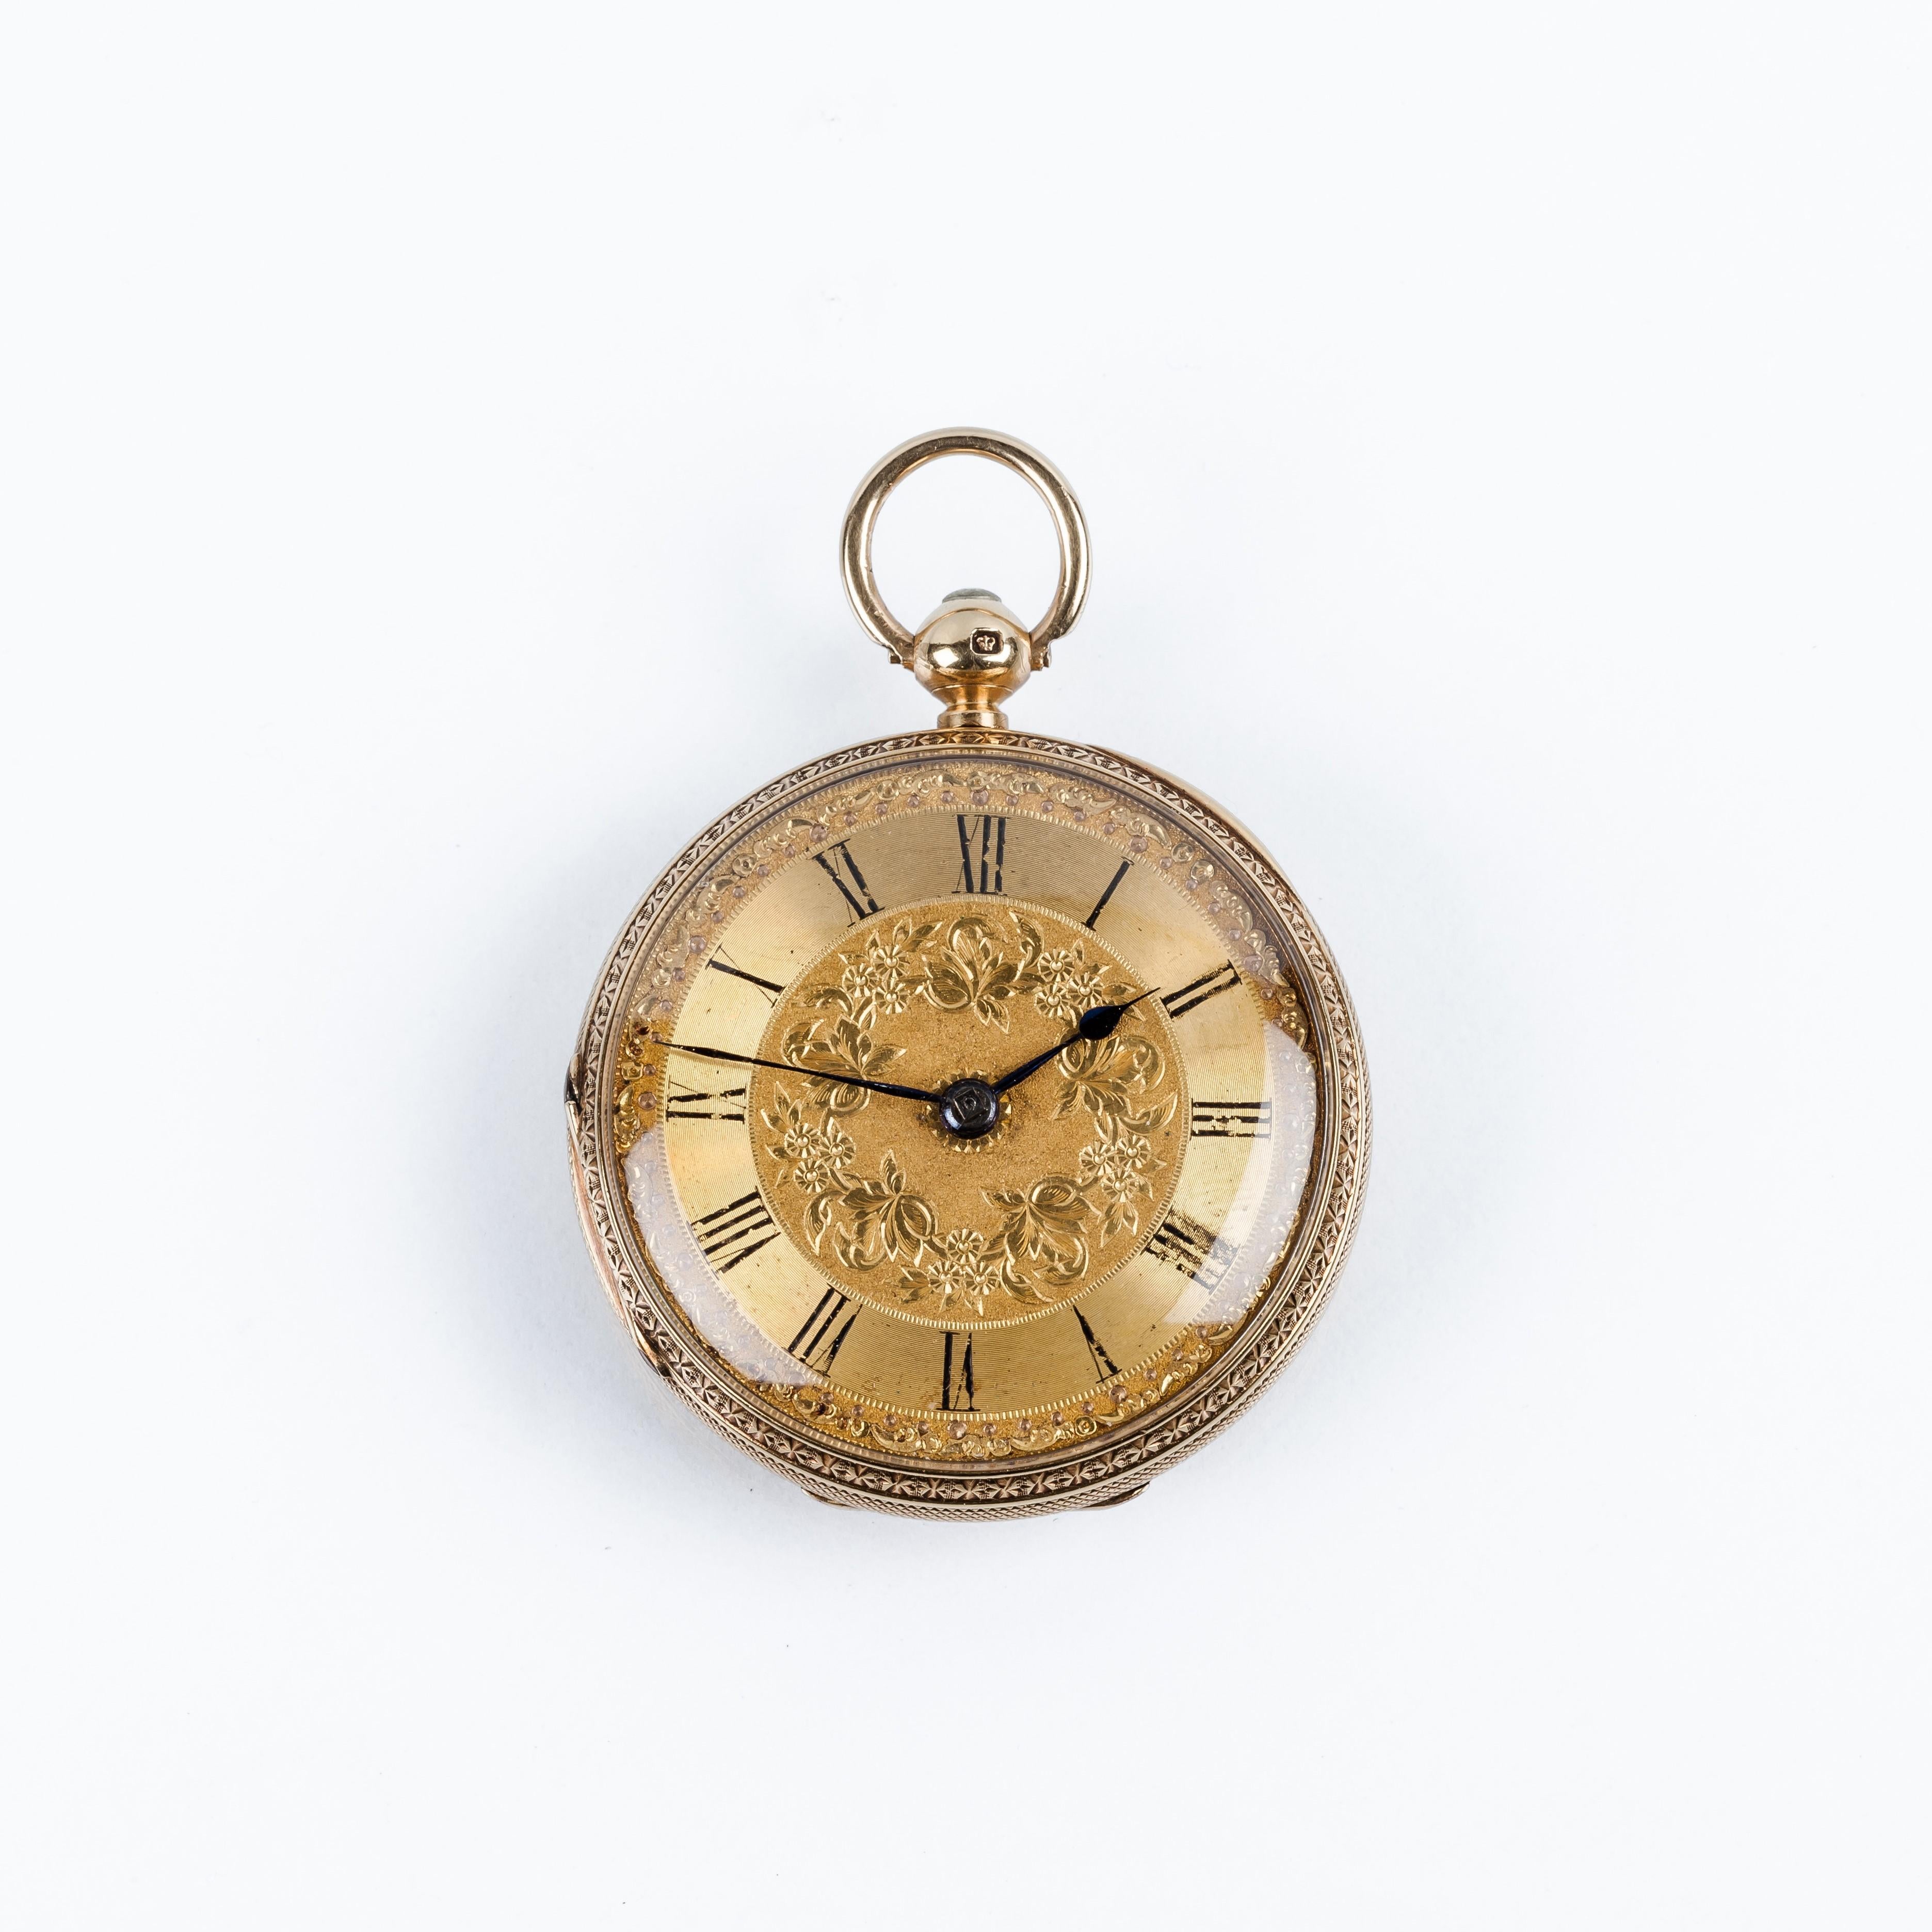 XIX Century Open-face Gold Pocket Watch R. STEWART, Argyle & Buchanan Sts., Glasgow, #16044.
Beautiful 43m/1.69in gold case with a thorough ornamental floral engraving with vegetation on the external lid. Internal lid is plain. Gold sphere,